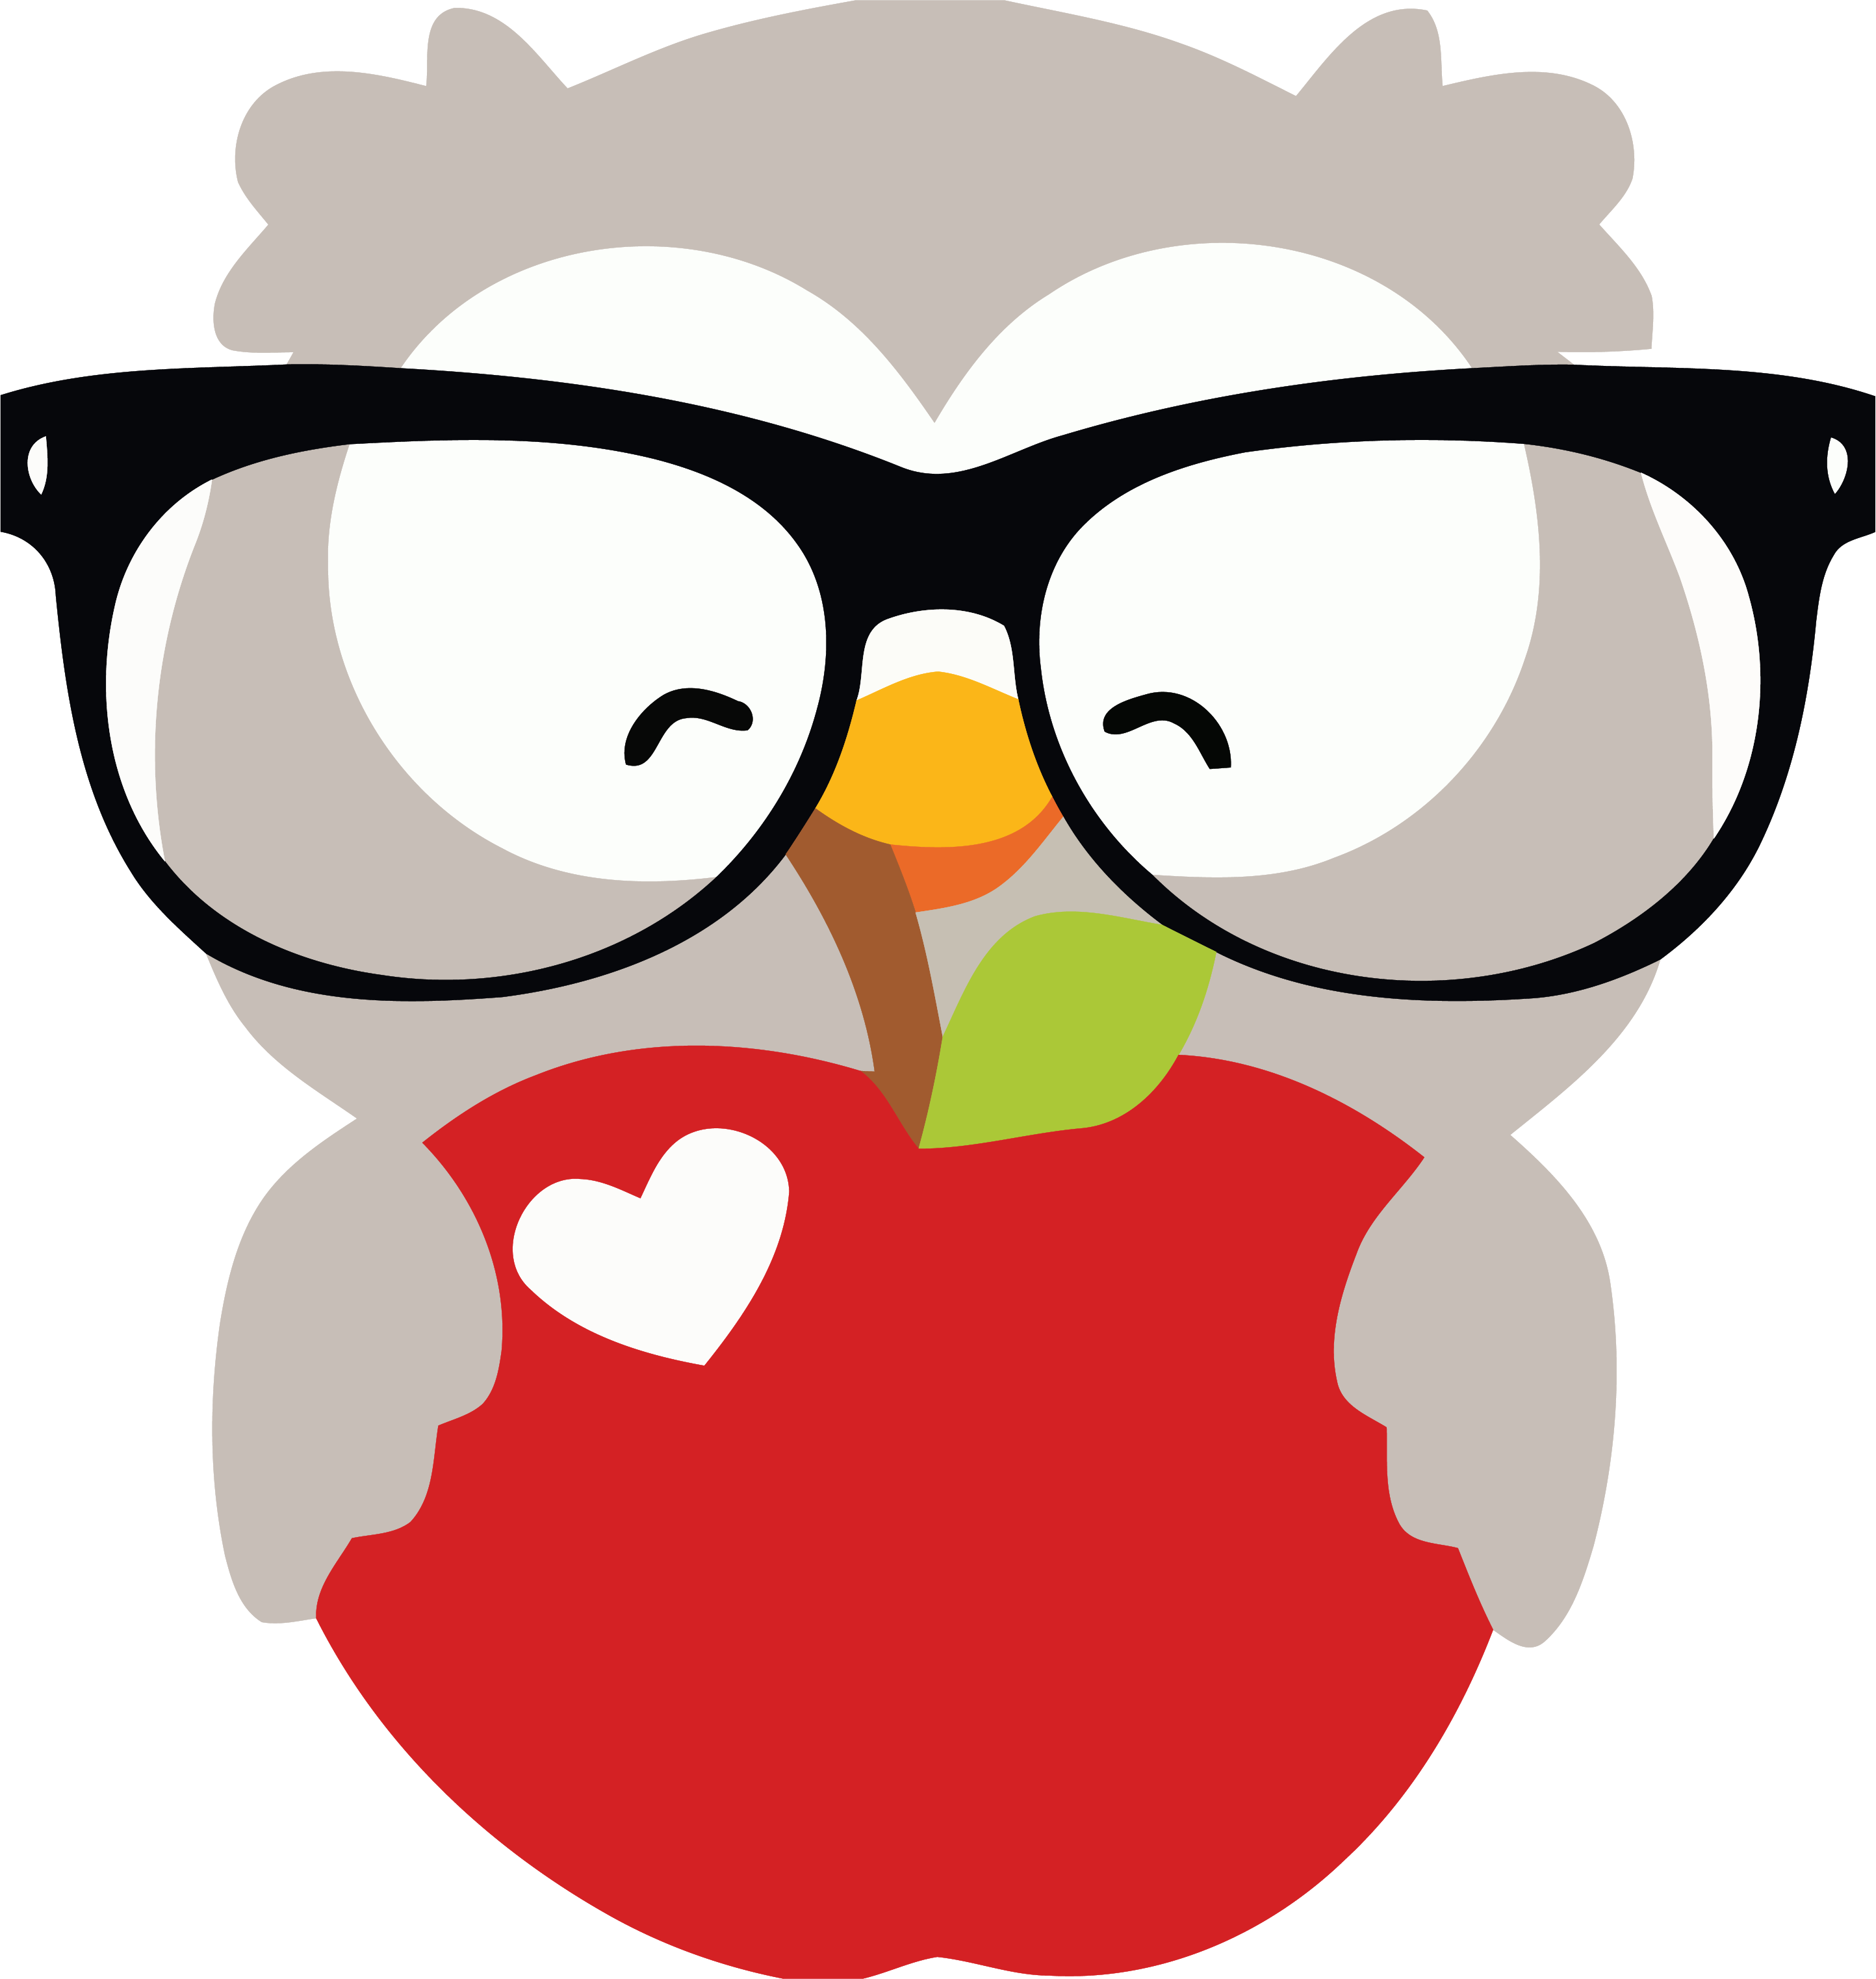 A Cartoon Of An Owl Wearing Glasses And Holding An Apple